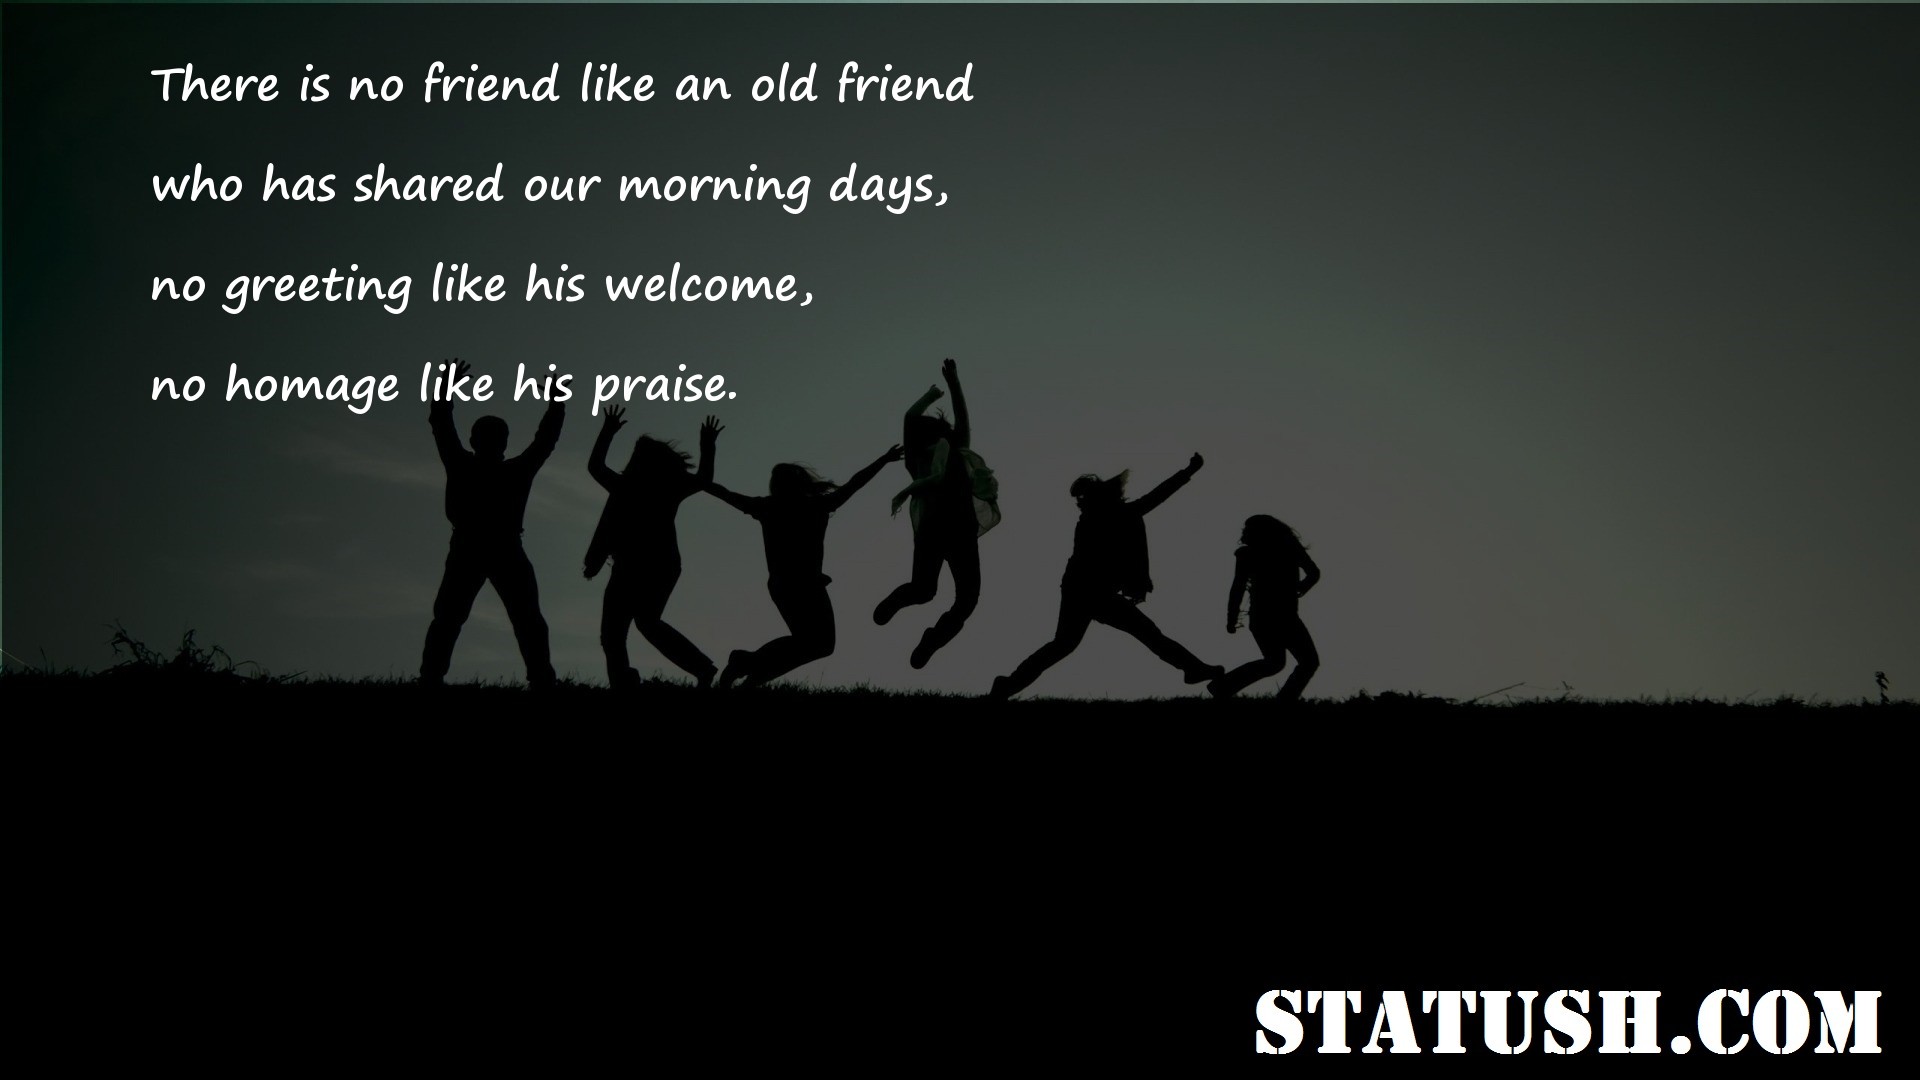 There is no friend like an old friend - Friendship Quotes at statush.com